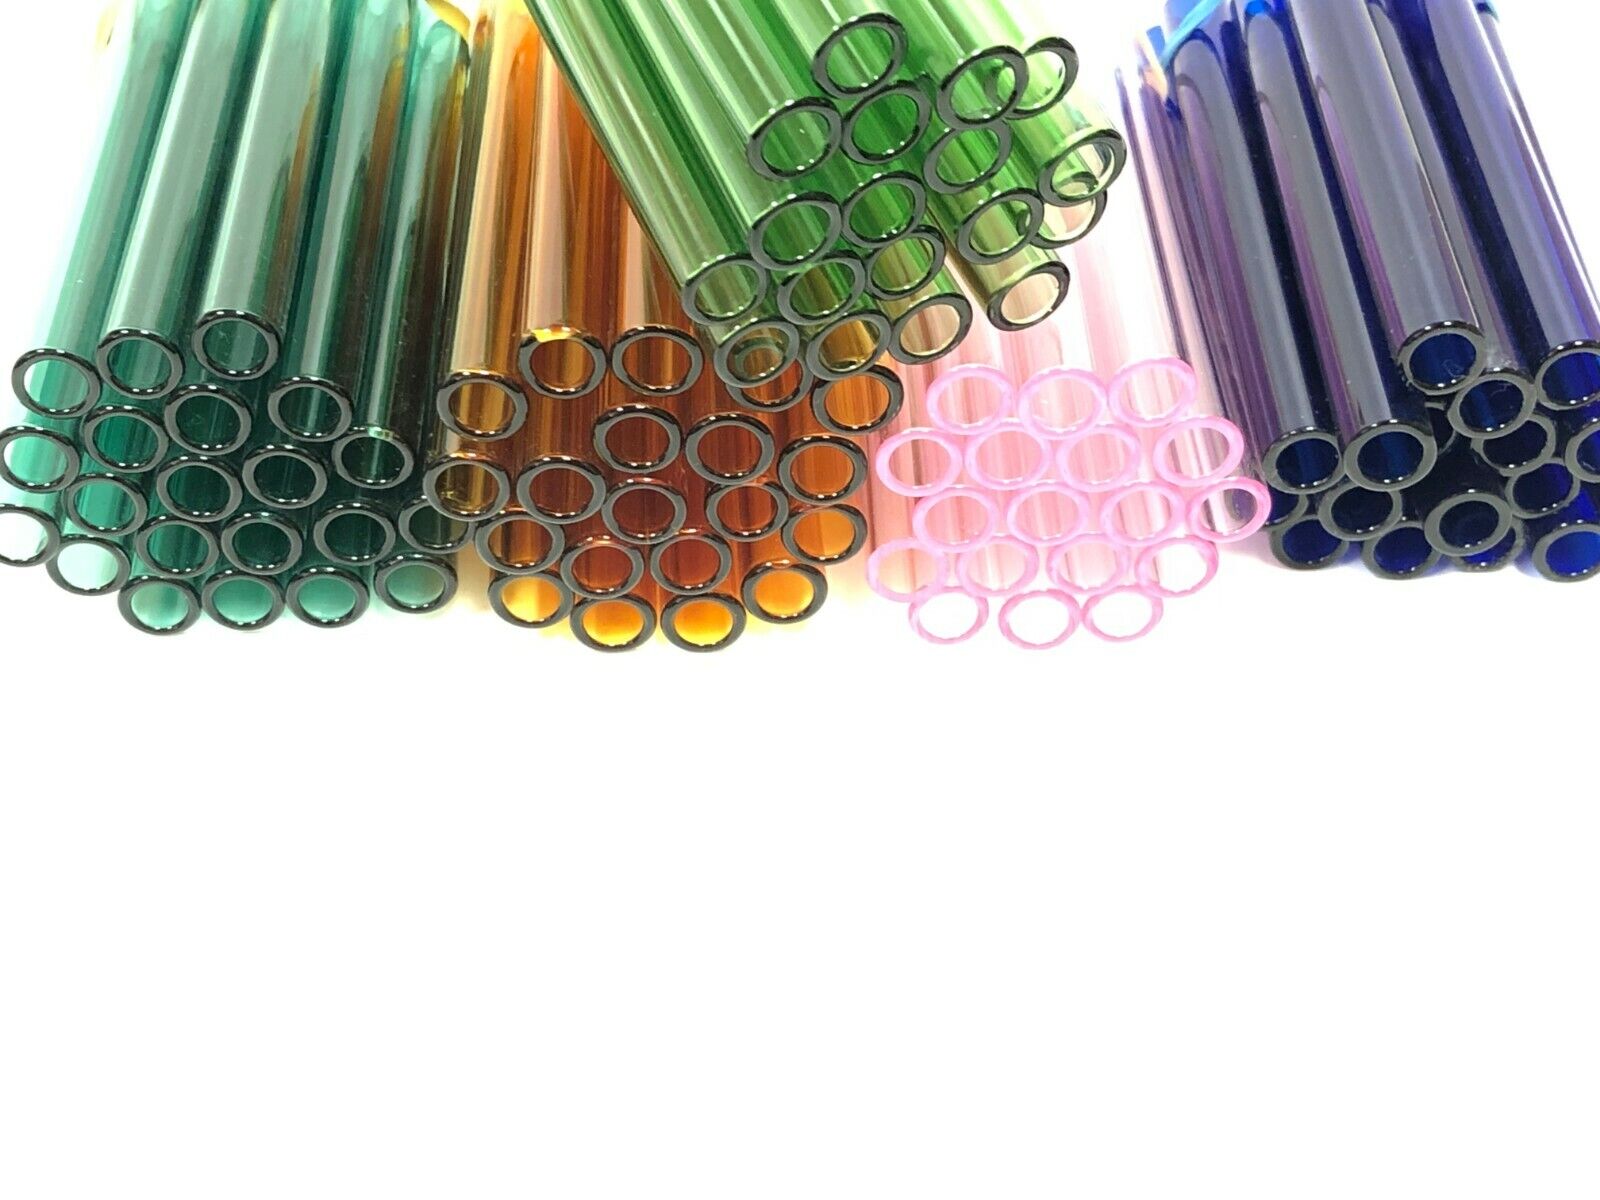 08 Pieces Glass tube Pyrex 12 mm X 2 mm X 12" Long   Blowing tube  ID=8mm  Color Pyrex Does Not Apply - фотография #7